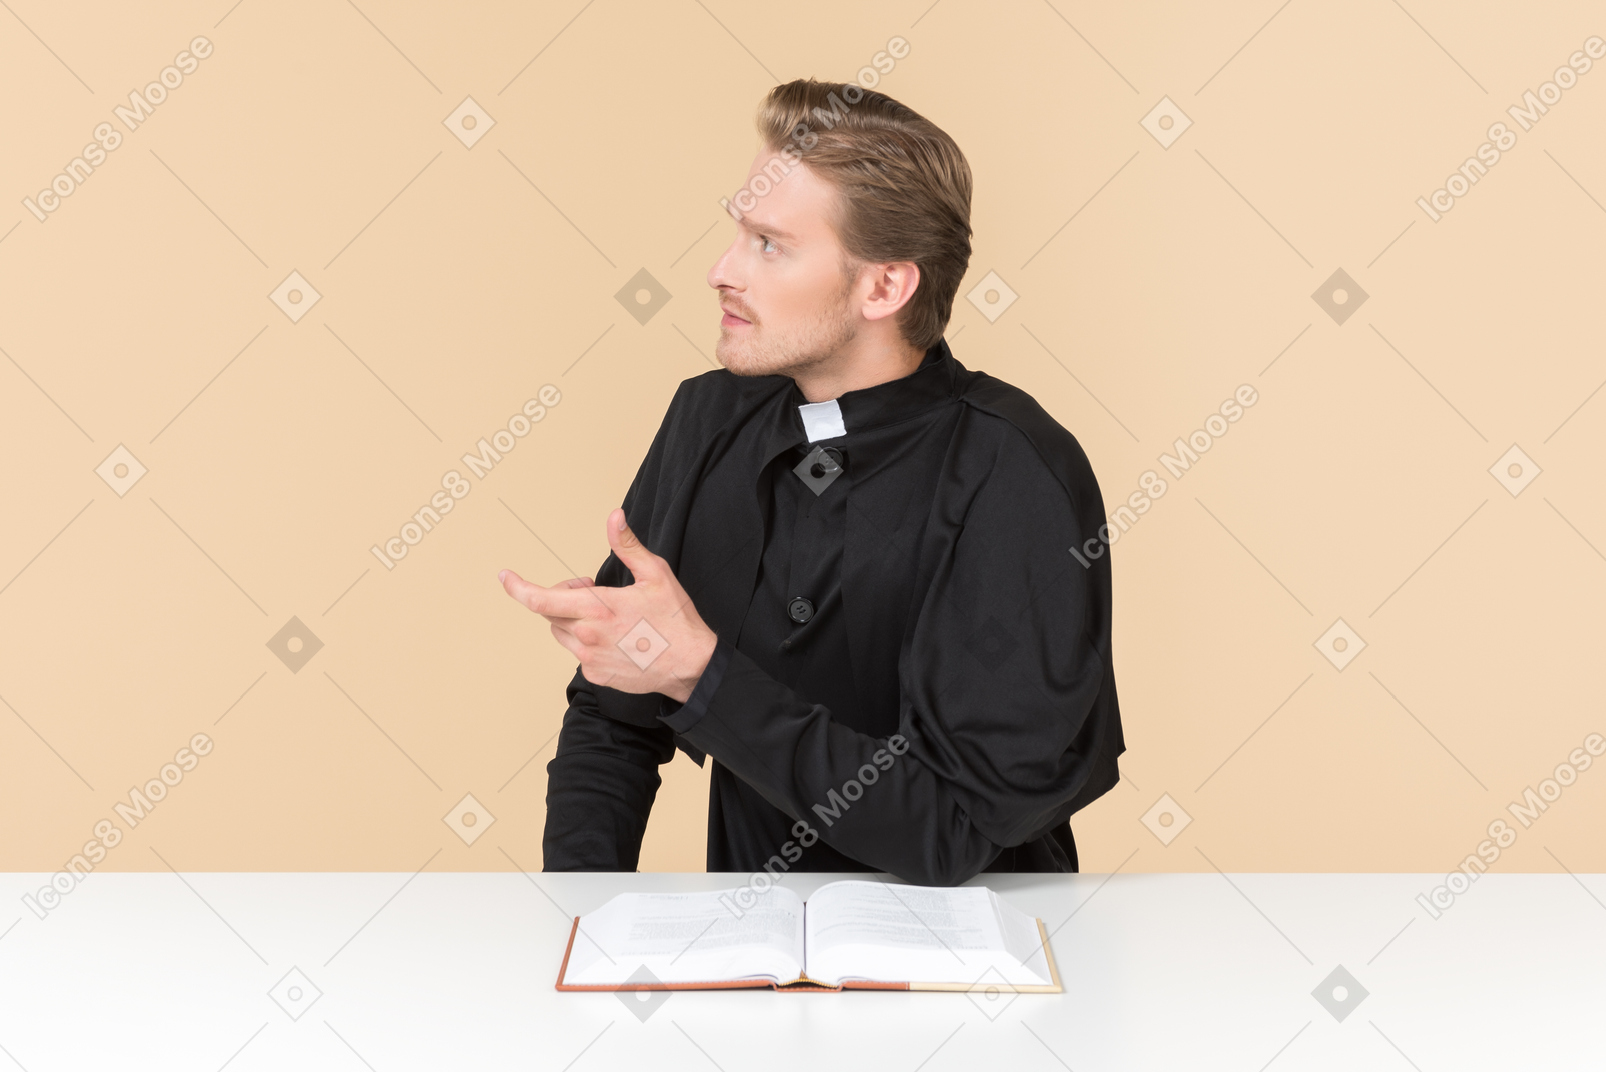 Catholic priest sitting at the table with open bible book and like saying something